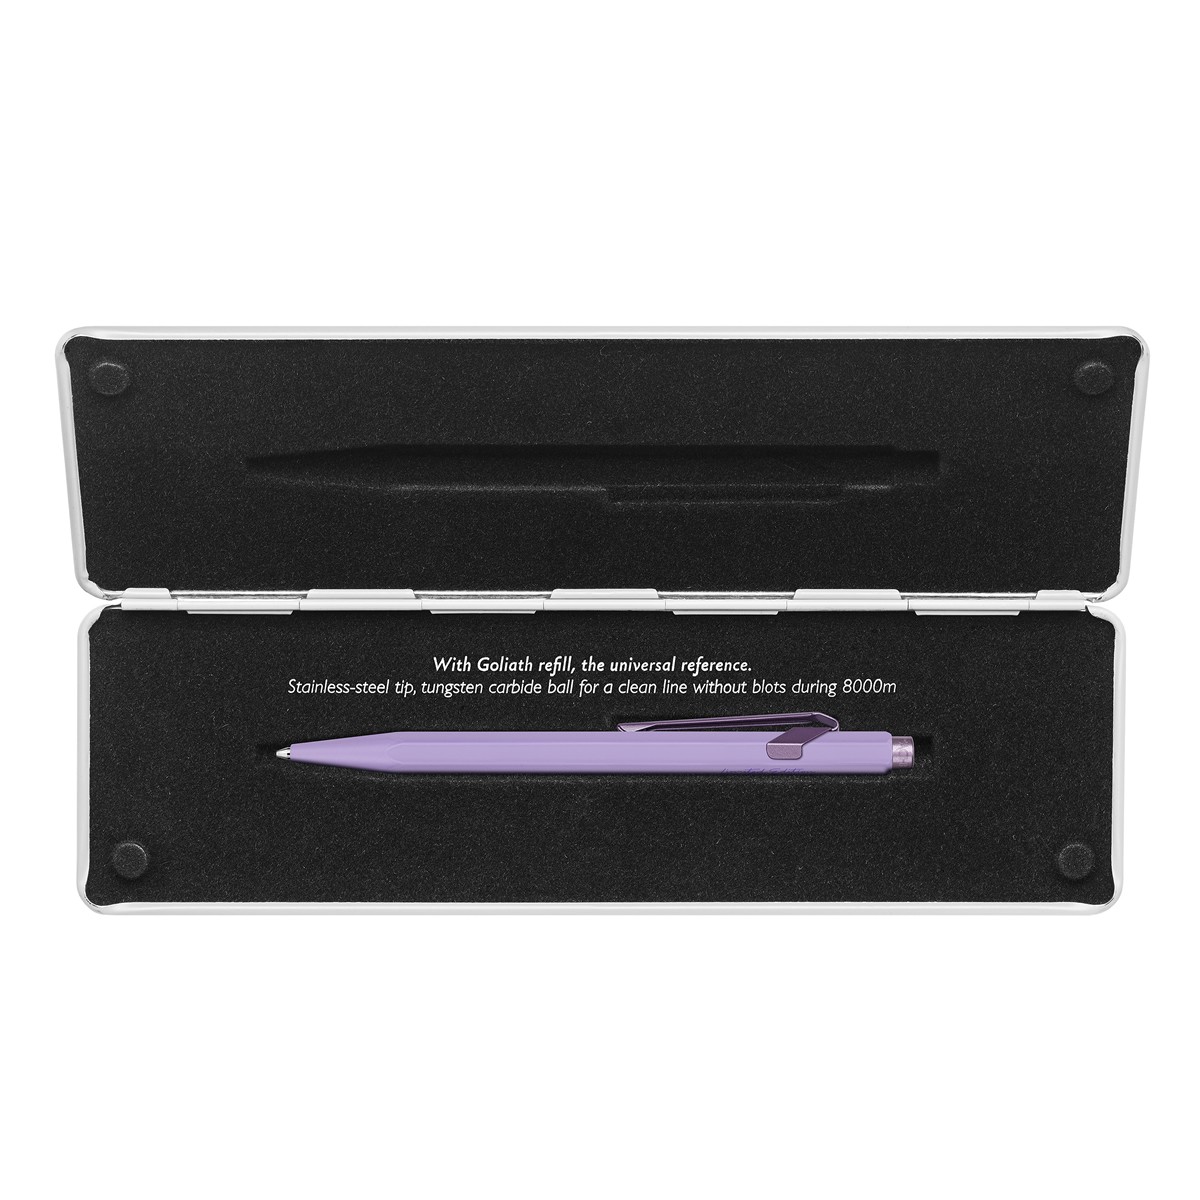 Caran d'Ache CLAIM YOUR STYLE 3 Στυλό Διαρκείας Limited Edition - Violet